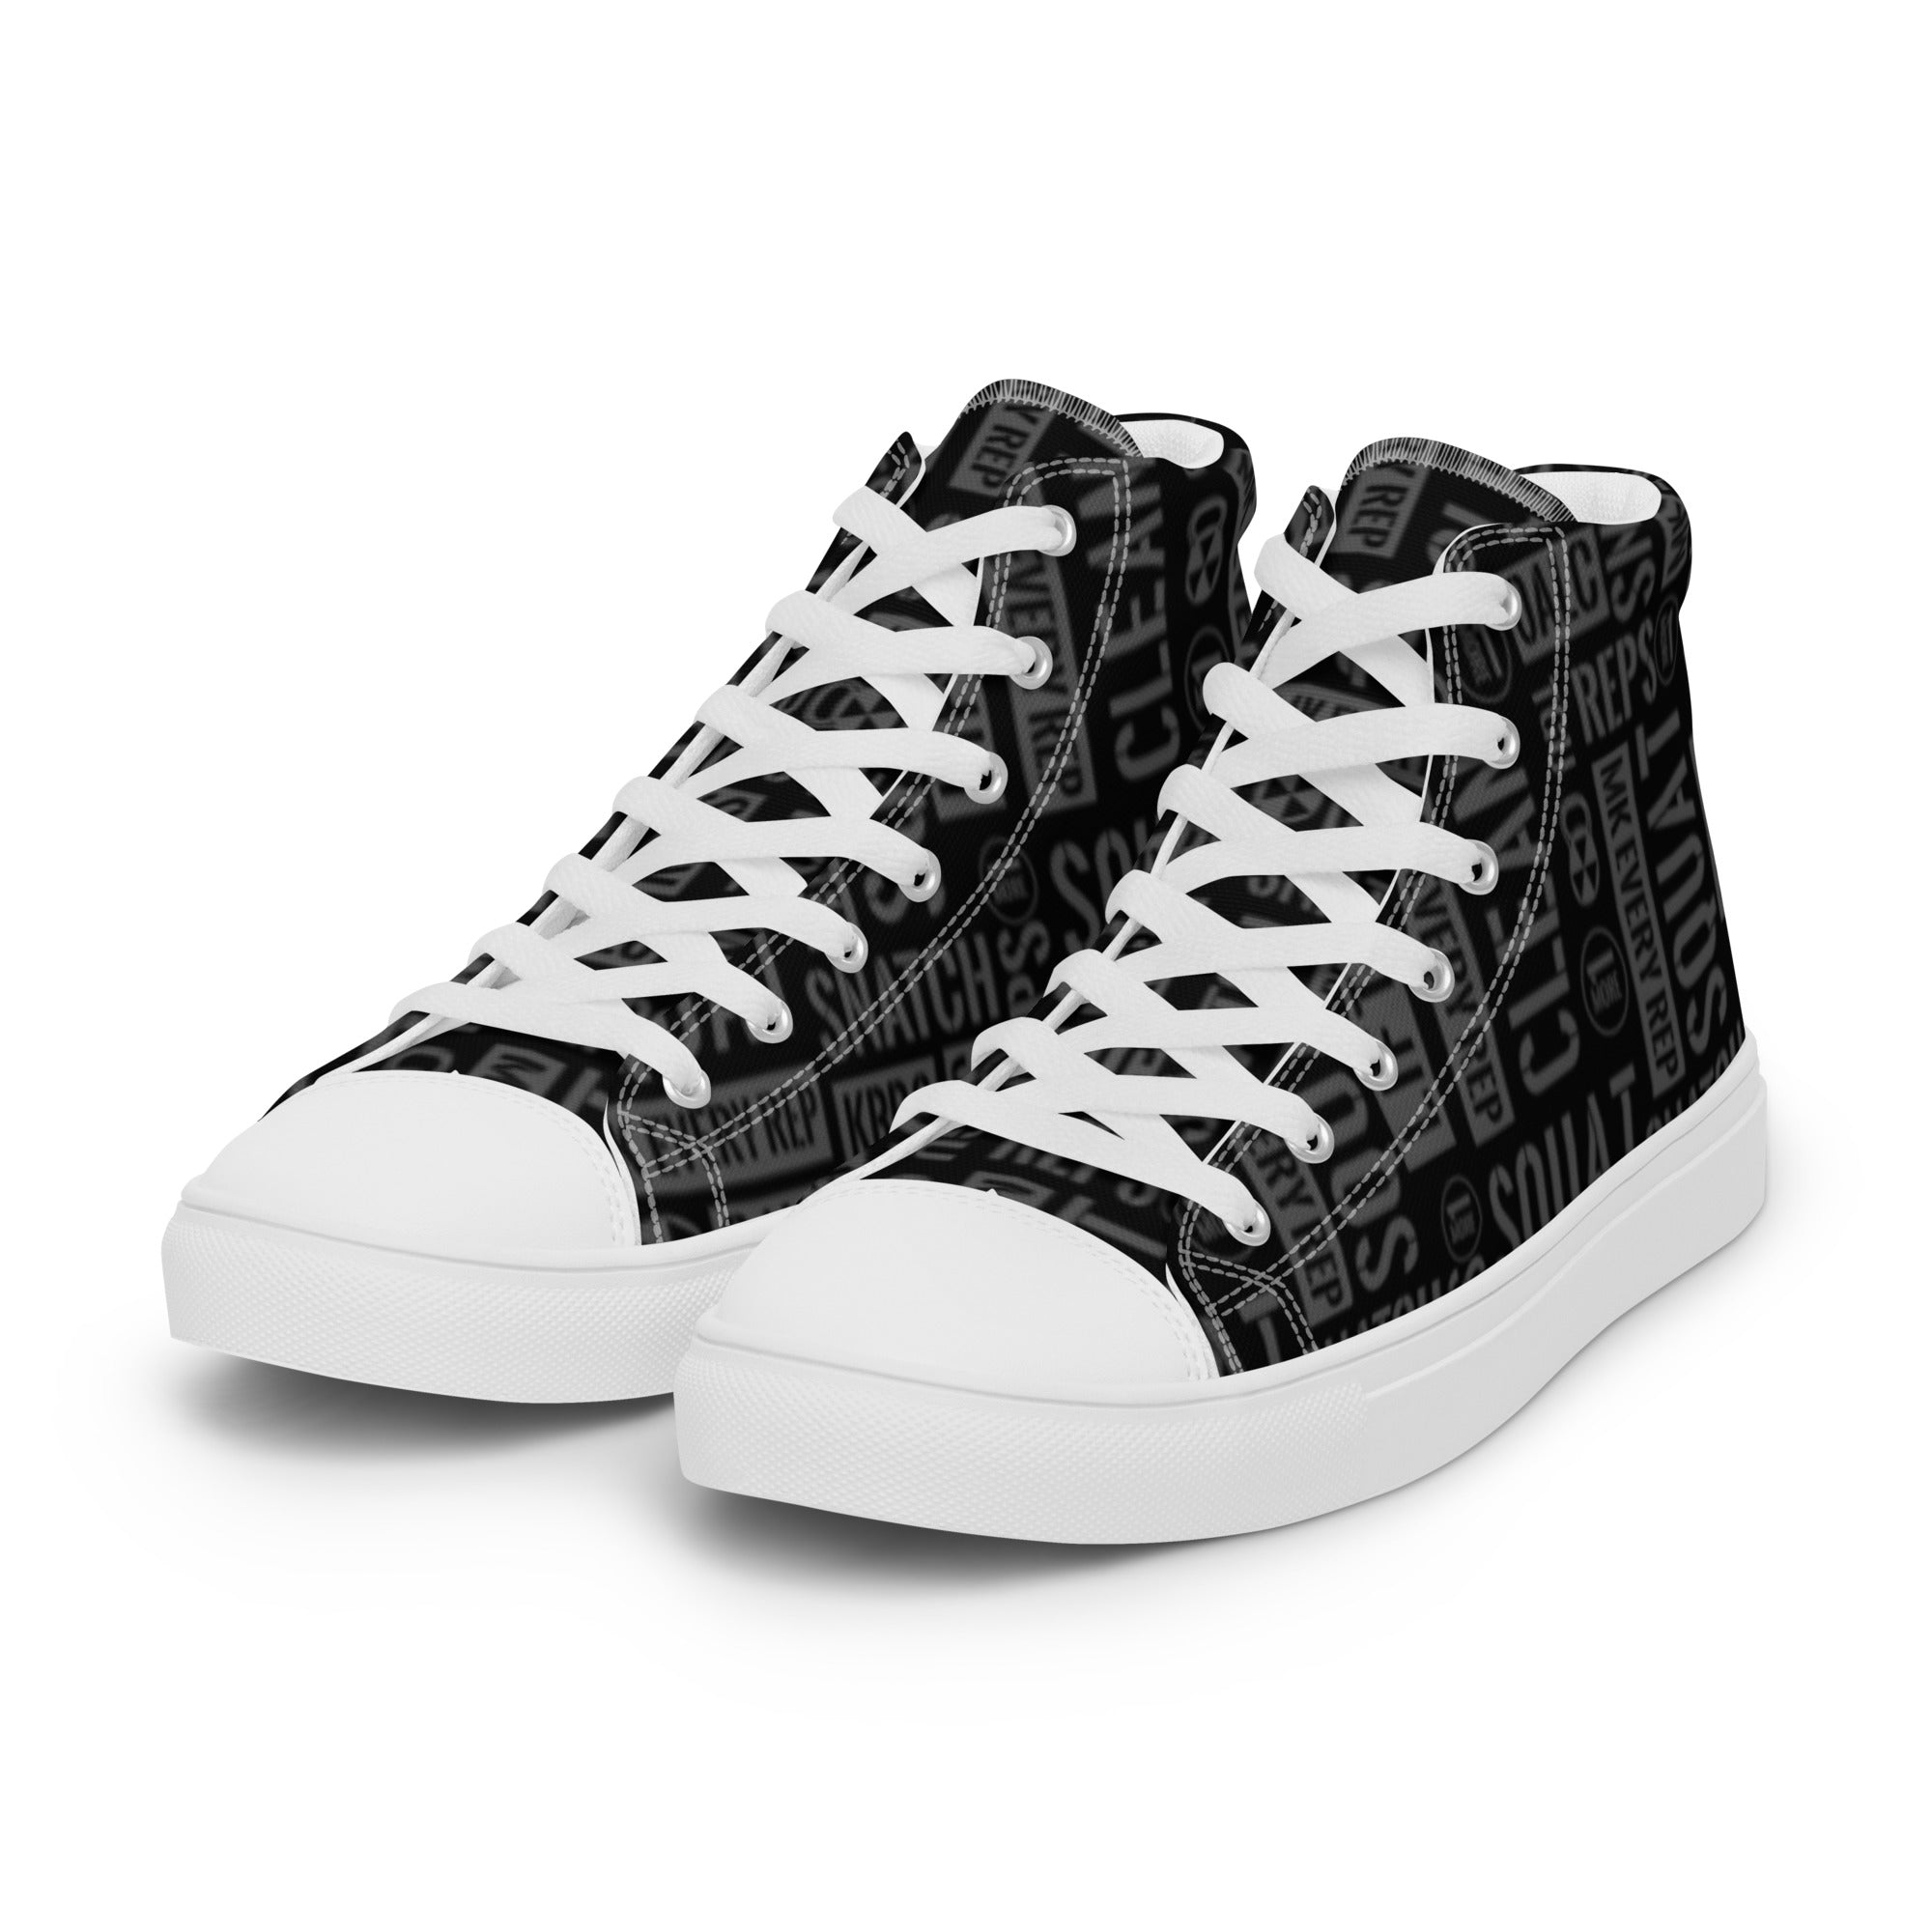 Black/Gray Acronyms Men’s High Tops Canvas Shoes